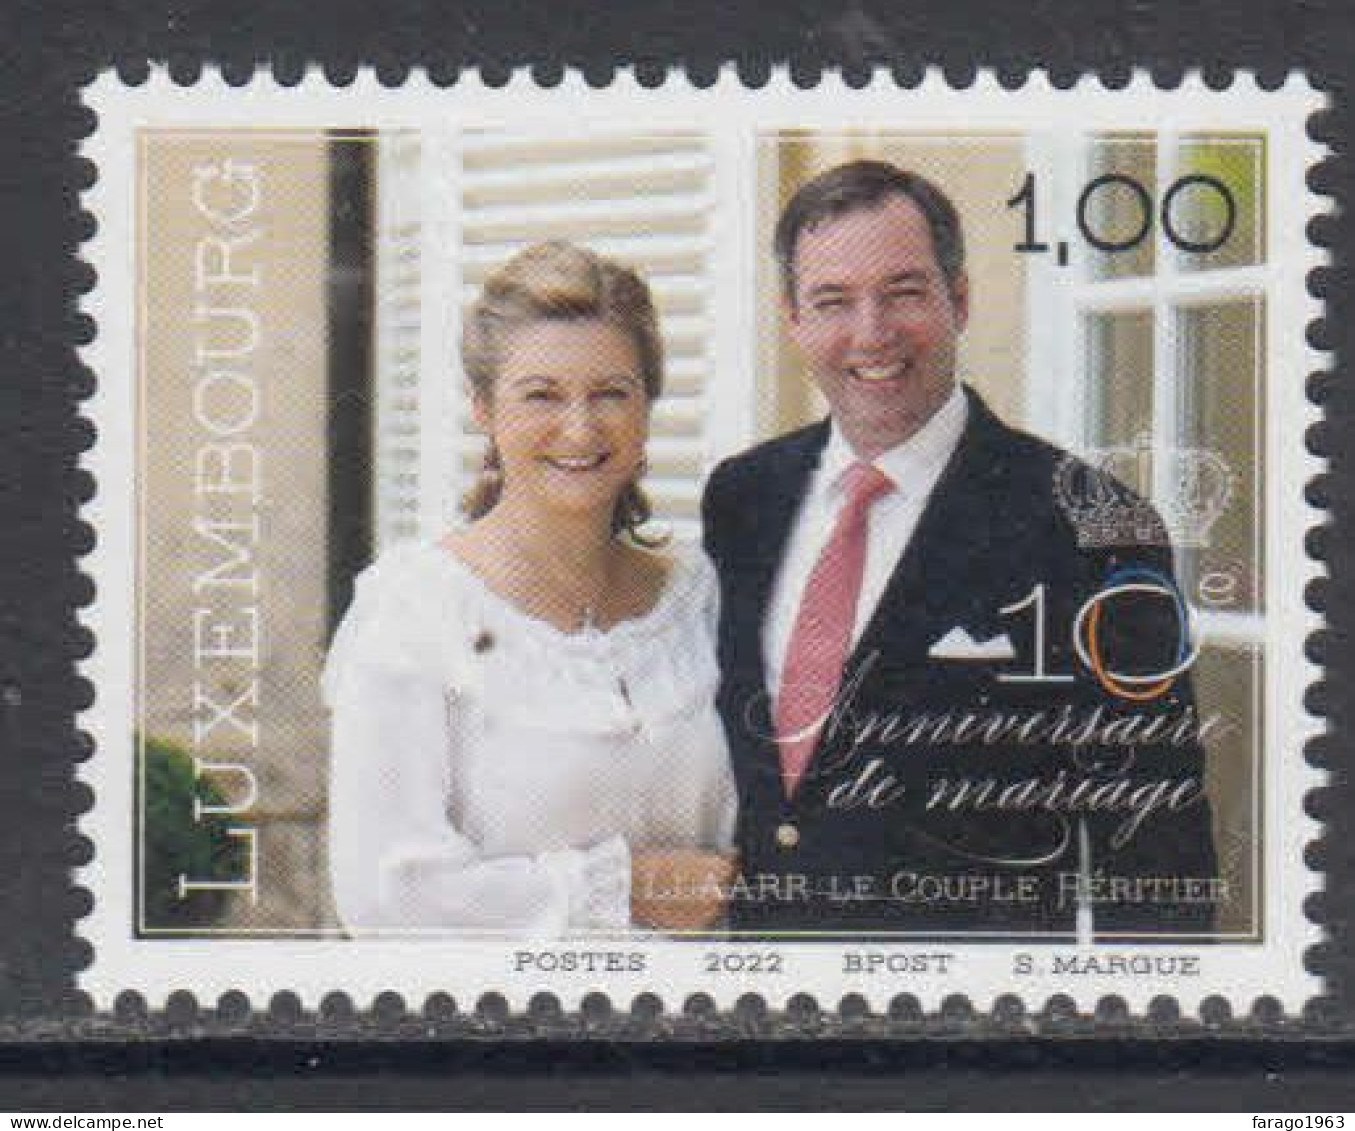 2022 Luxembourg Wedding Anniversary Royalty Complete Set Of 1 MNH  @ BELOW FACE VALUE - Nuevos